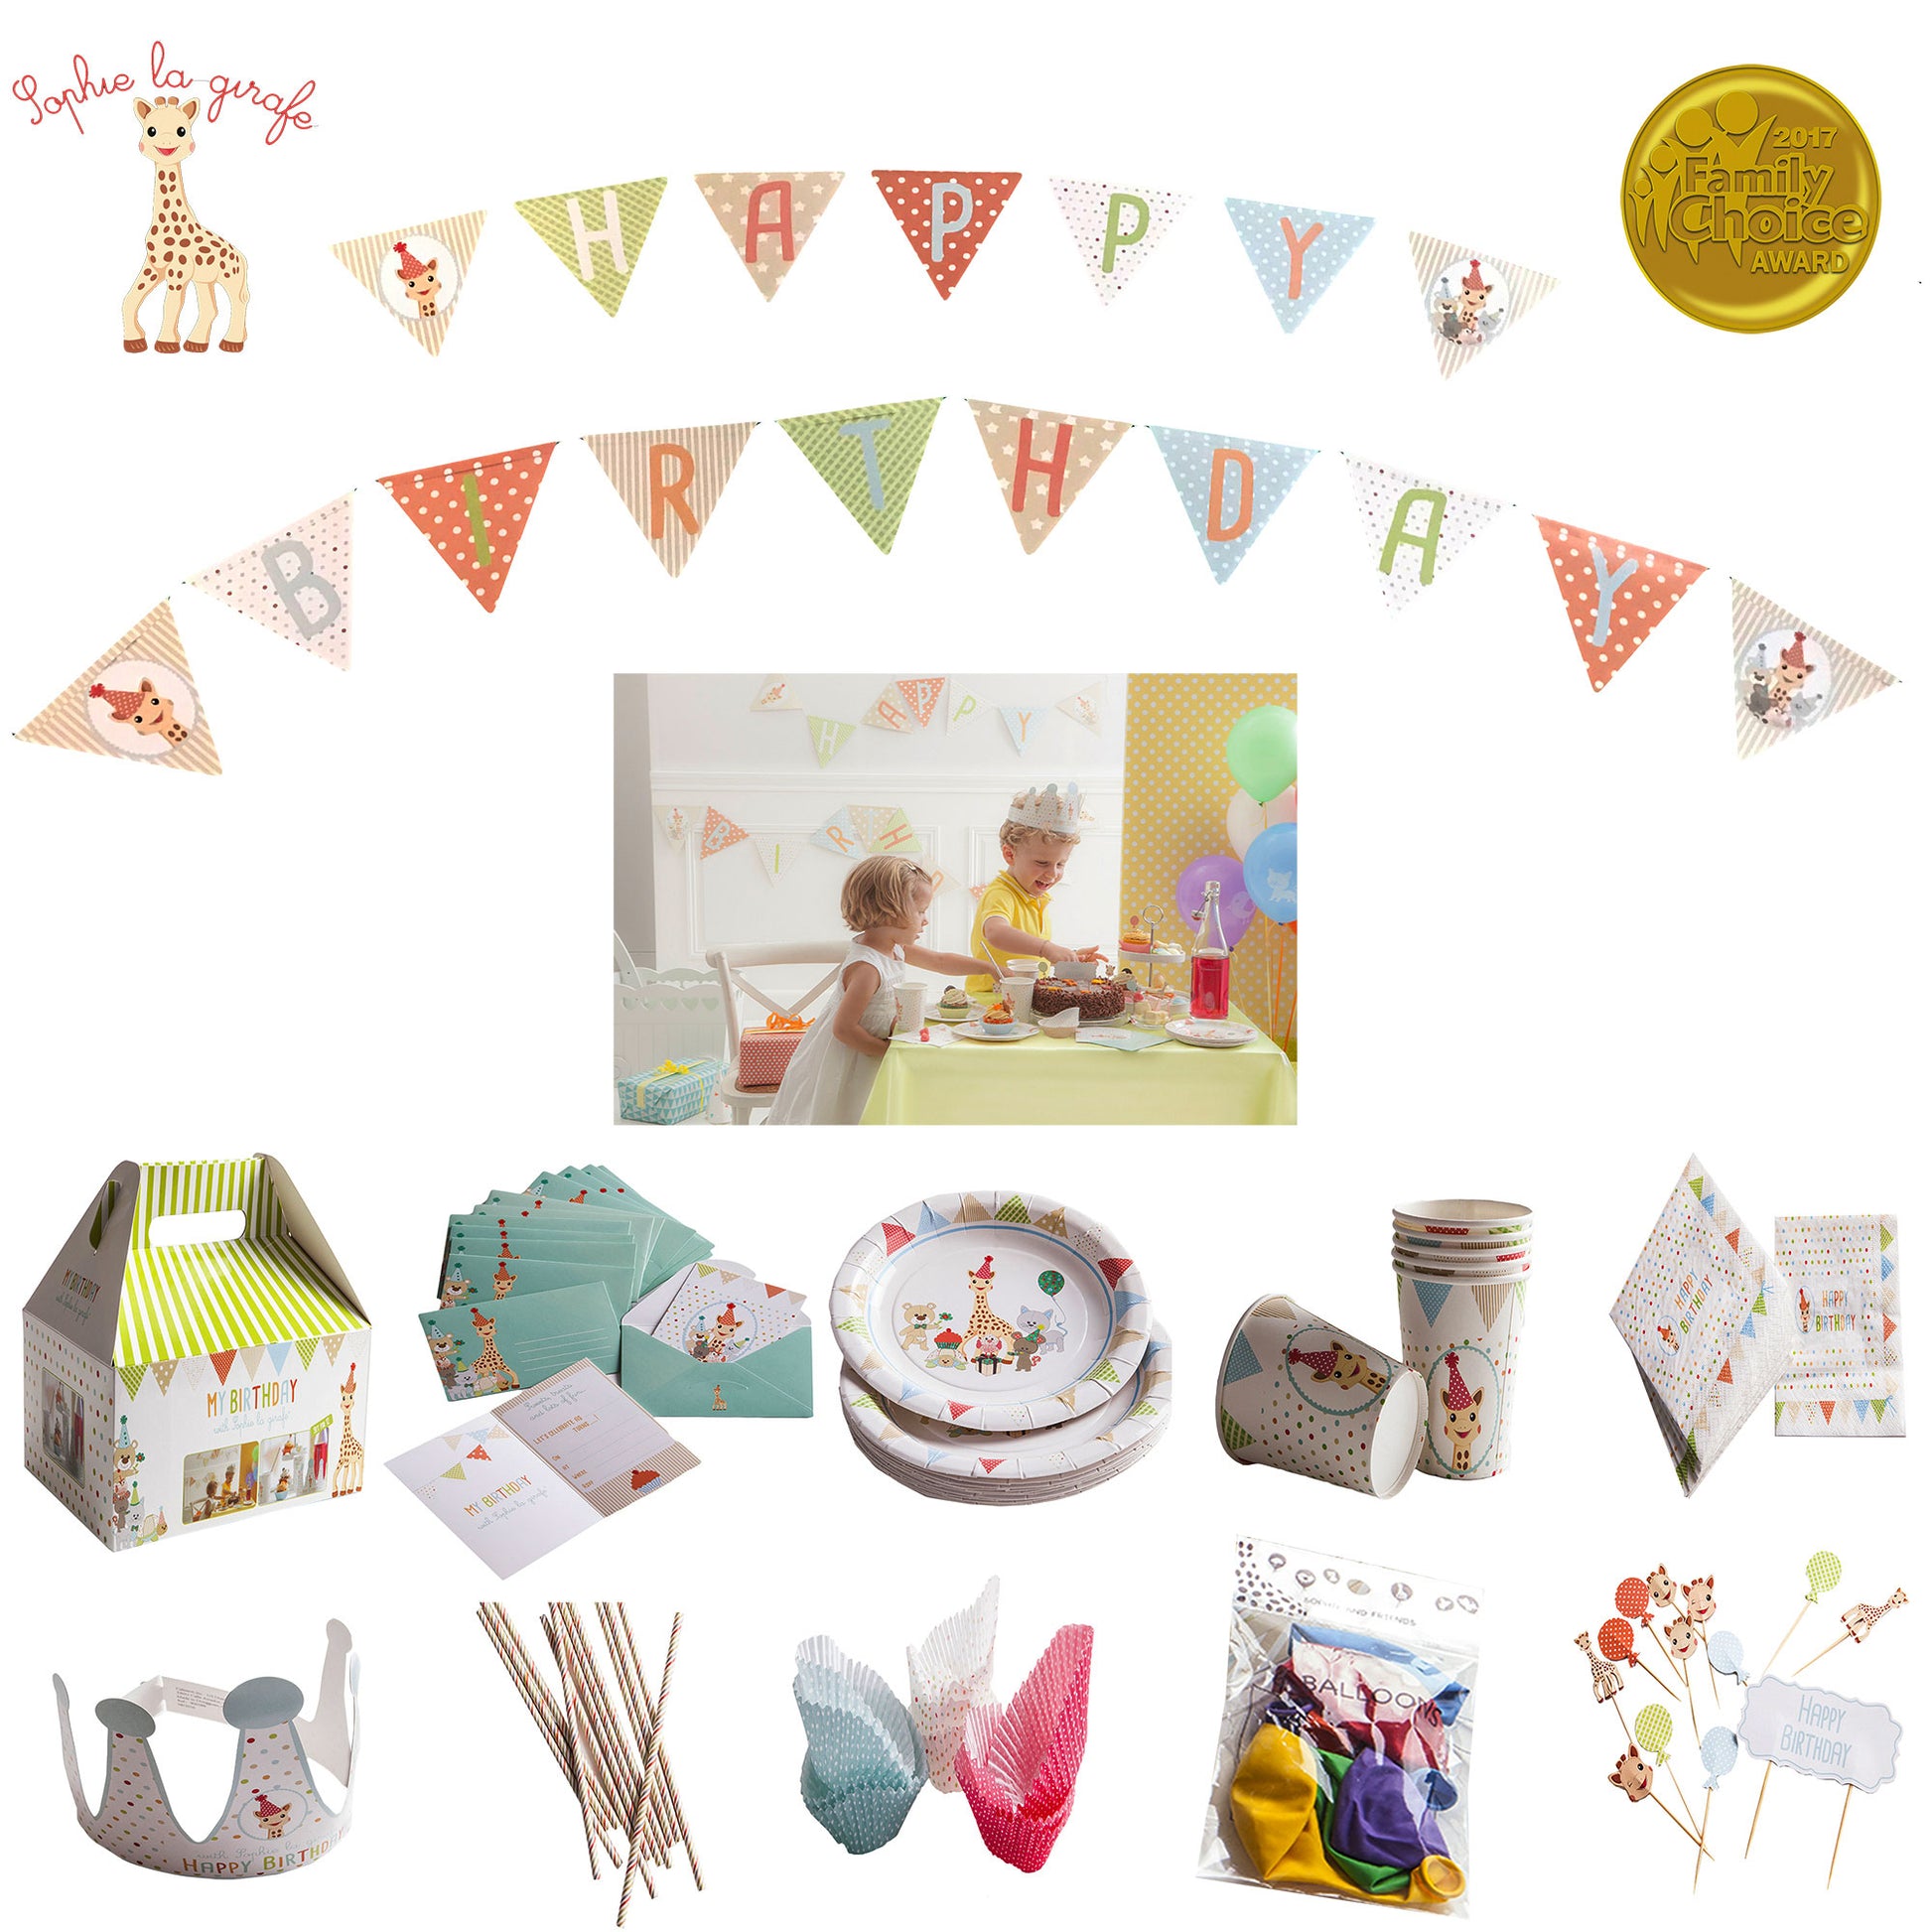 All elements in our Sophie la Girafe Birthday Set Party are created from 100% recycled paper, in keeping with our commitment to sustainability. Celebrate special occasions with eco-friendly charm and Sophie la Girafe's ageless allure.